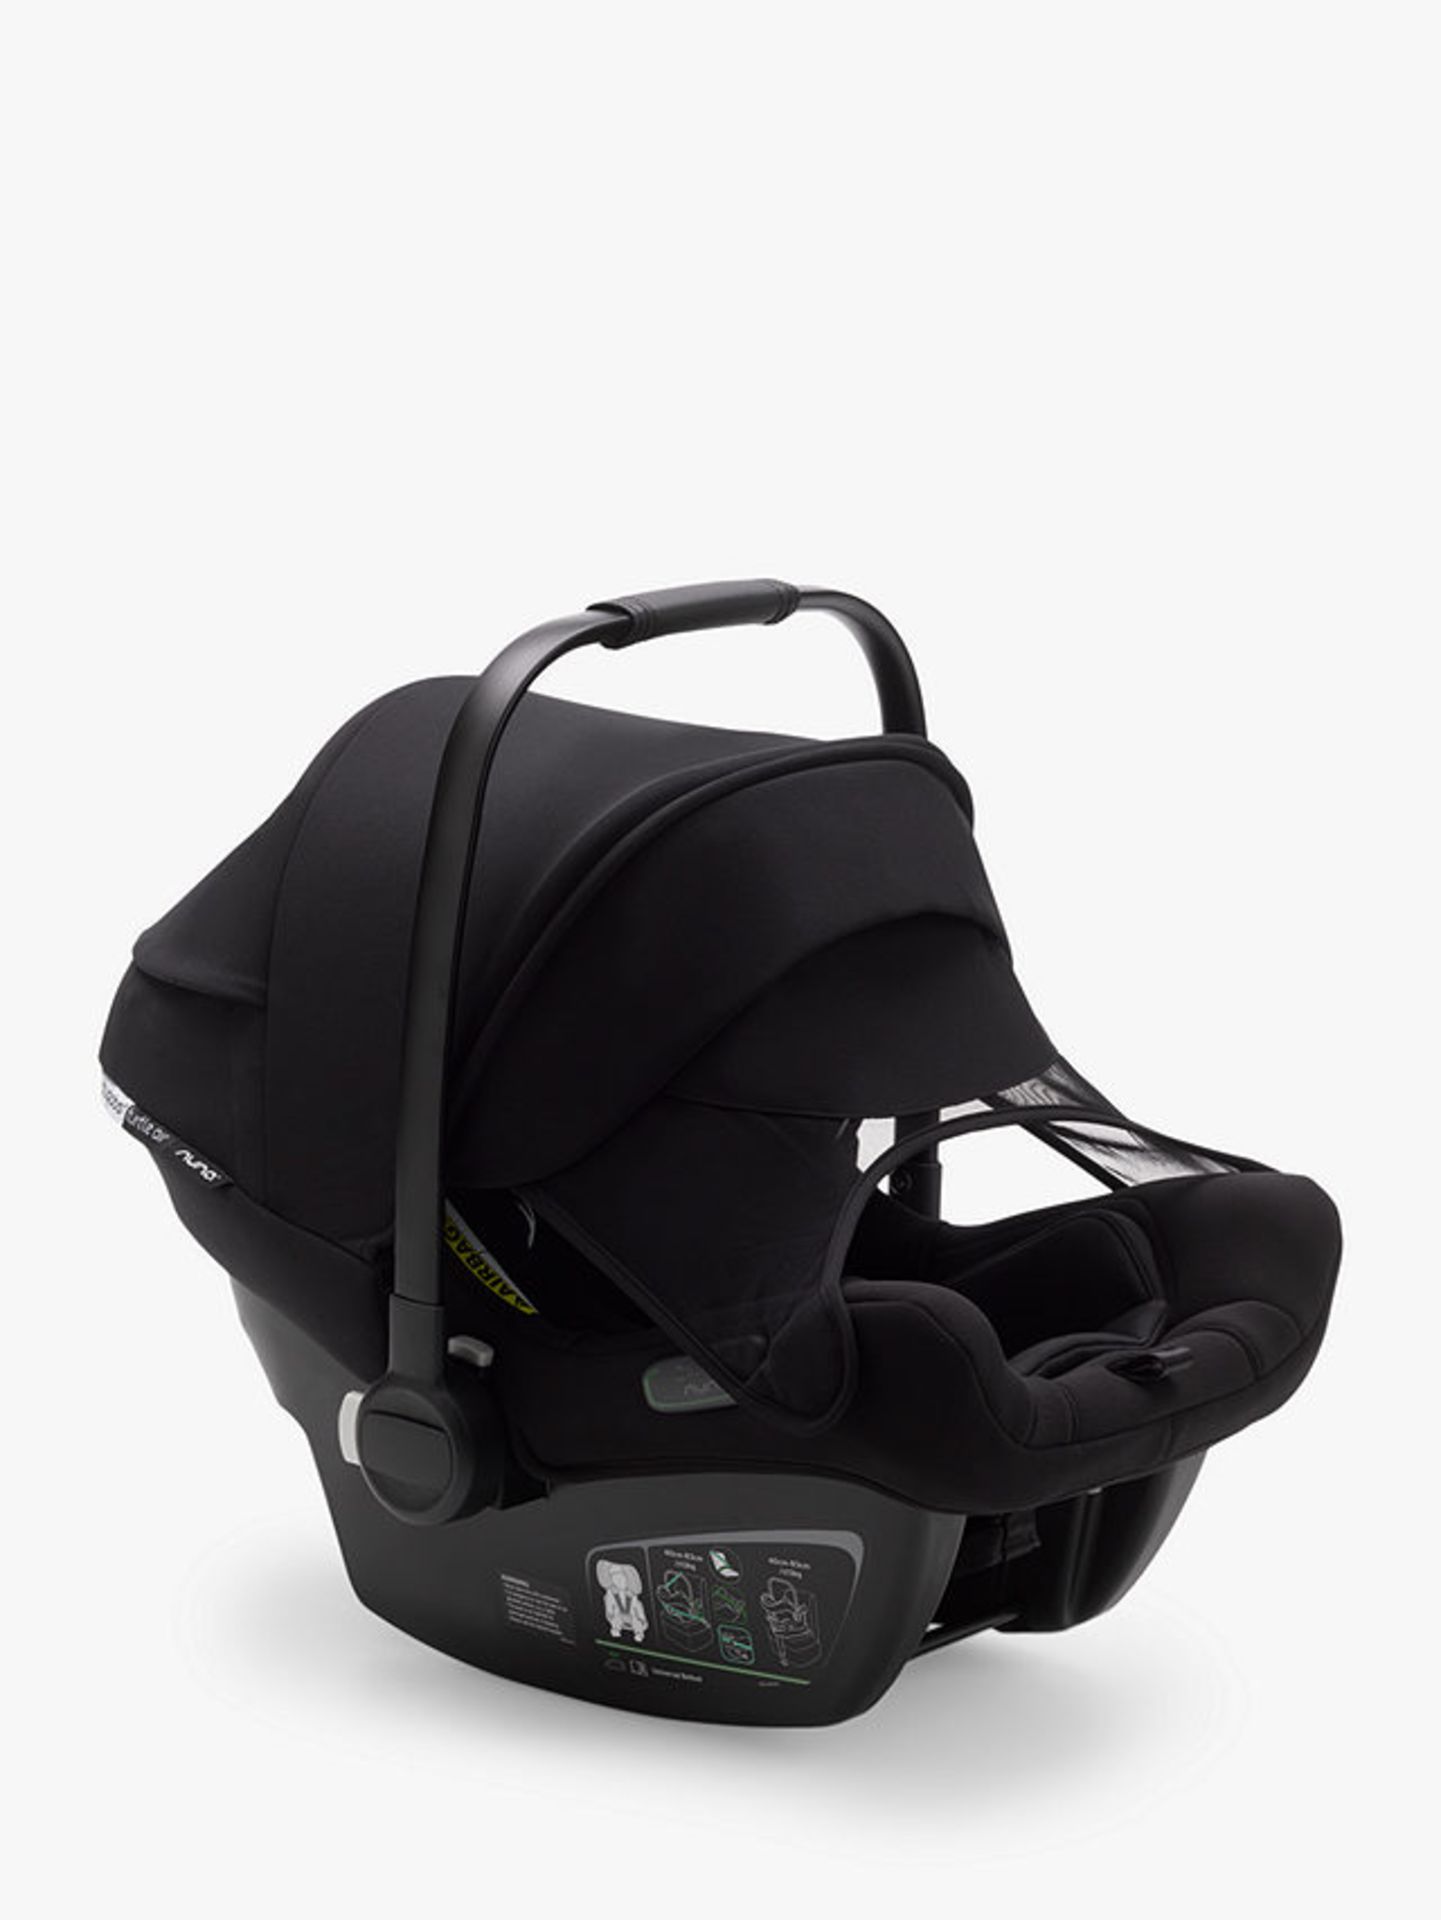 A1 PRODUCT NEW -   BUGABOO TURTLE AIR BY NUNA CAR SEAT IN BLACK - RRP Â£209 - Image 2 of 7